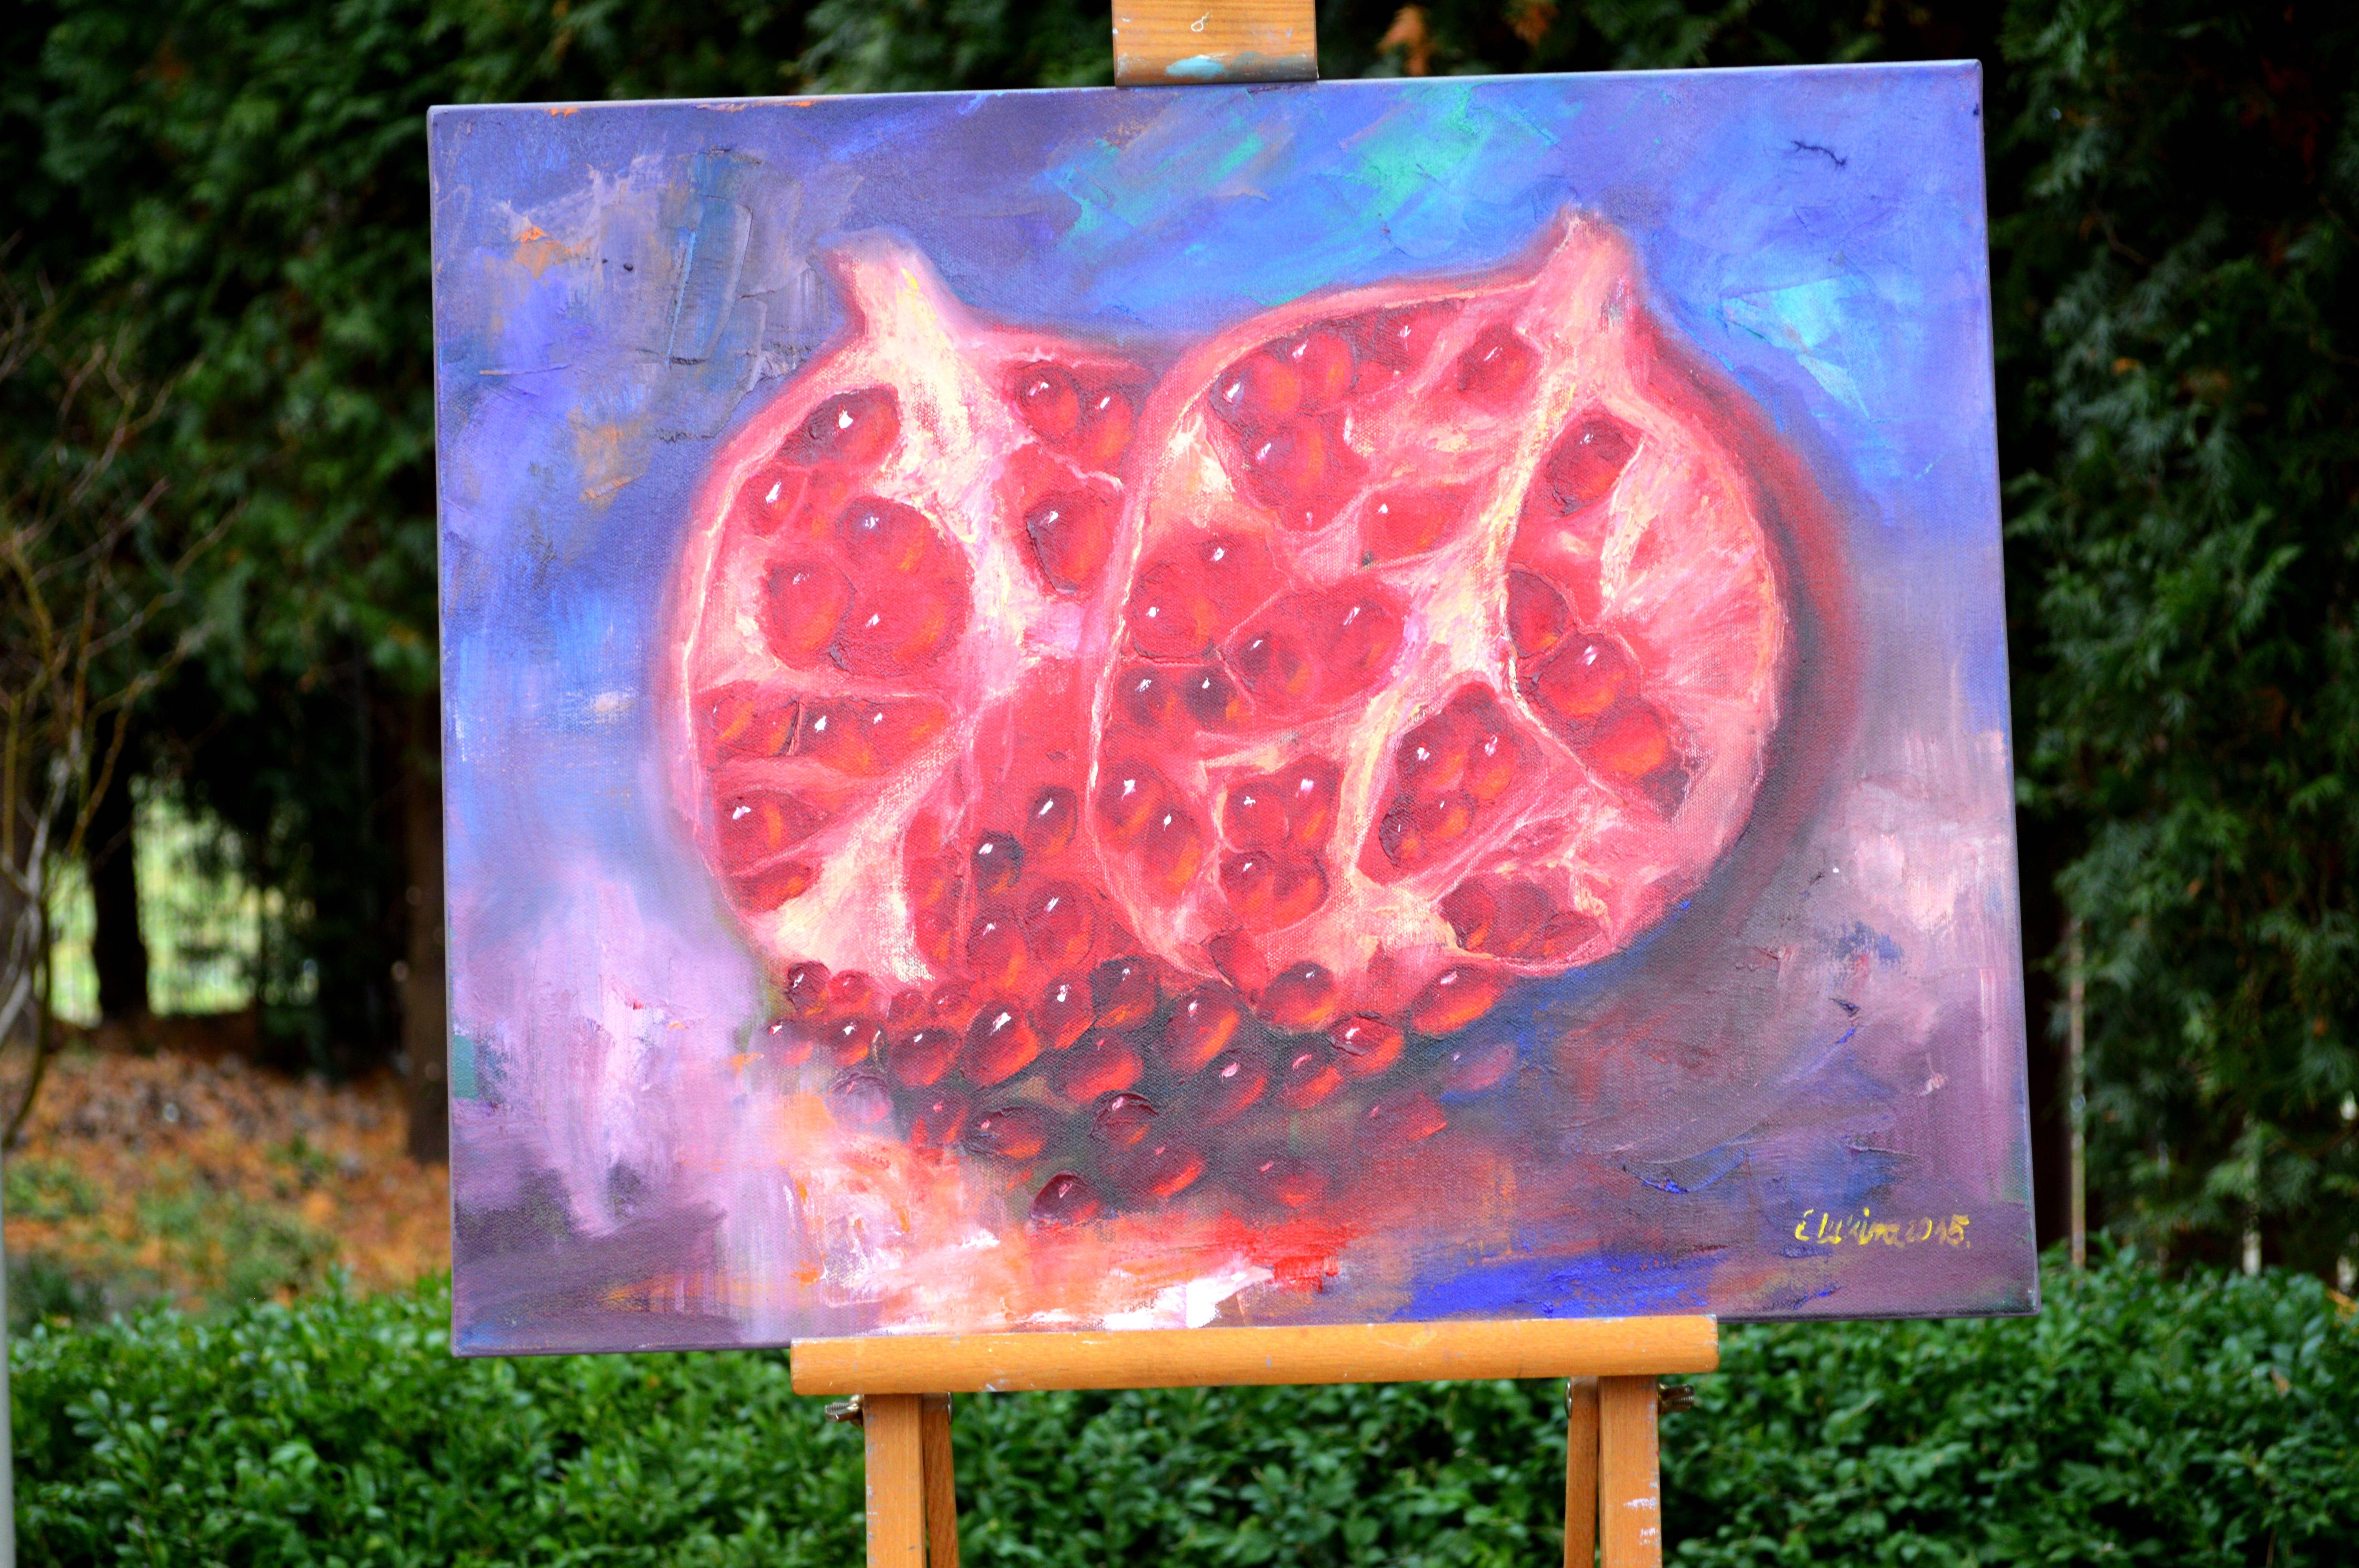 In this passionate dance of colors, I've captured the vibrant essence of life itself through the allegory of pomegranates. Oil paint weaves a textural symphony, blending realism with touches of impressionism, expressionism, and fine art. Each